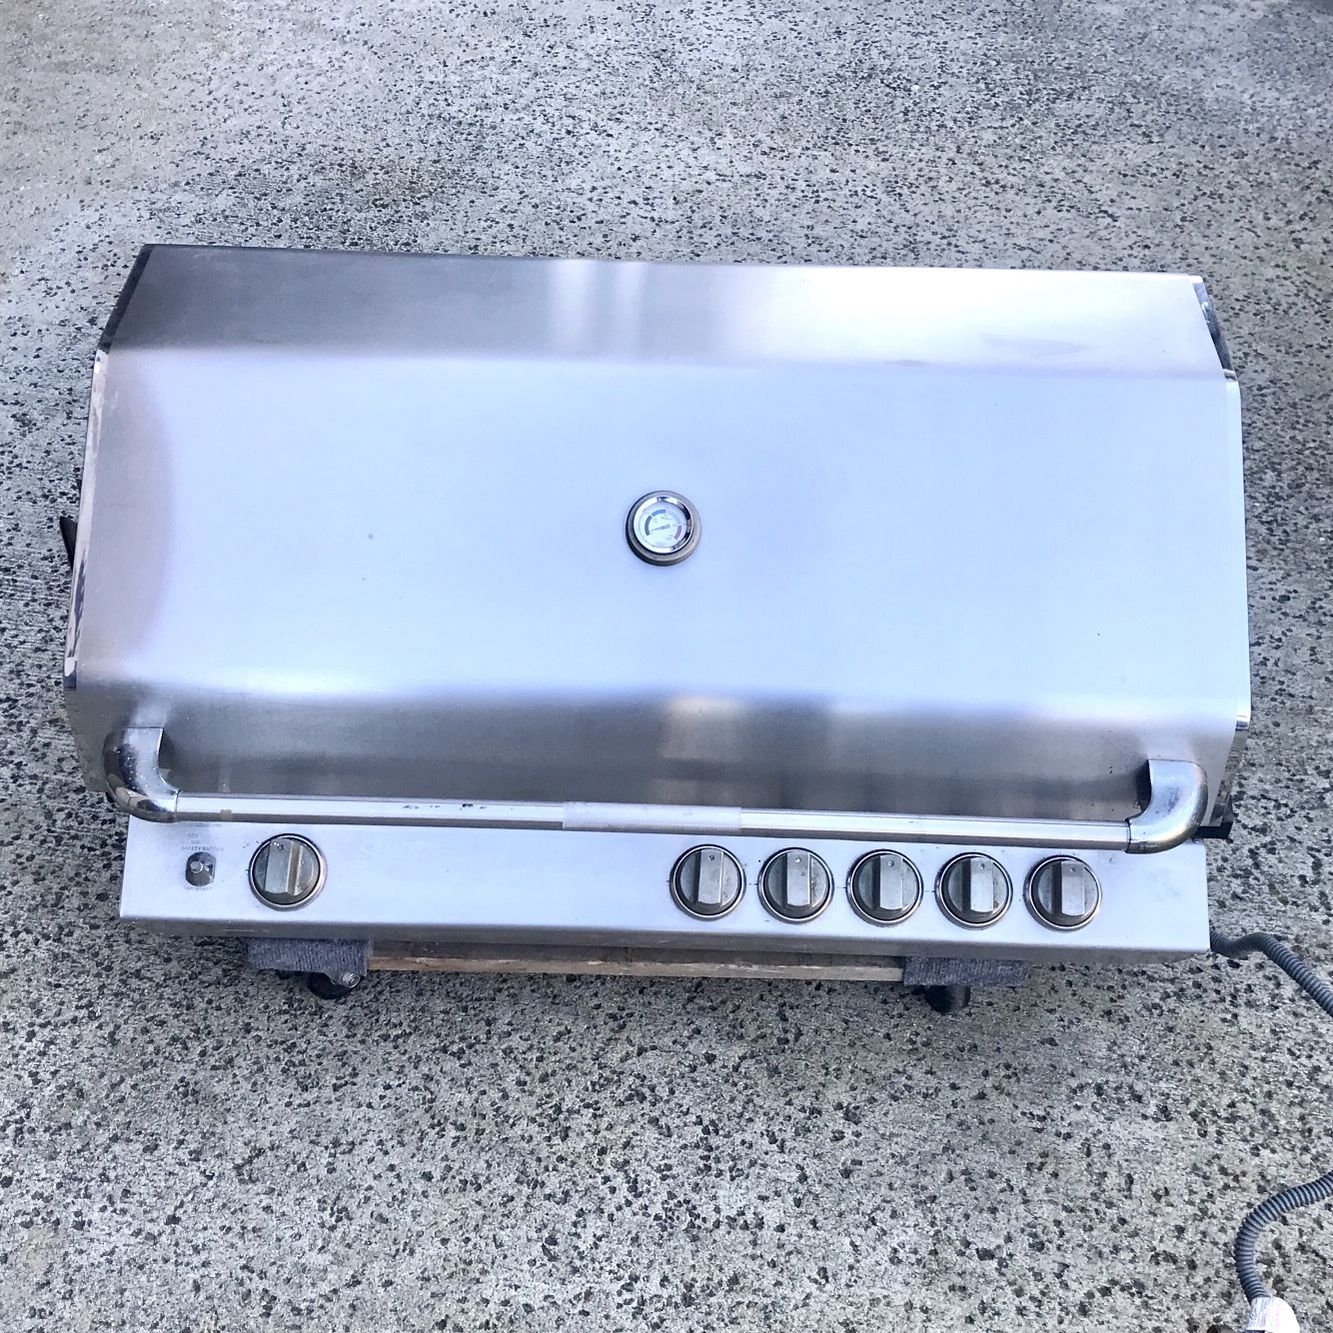 BARBECUES GALORE Stainless steel - 5 Burner Gas Grill Built In  39.5" 